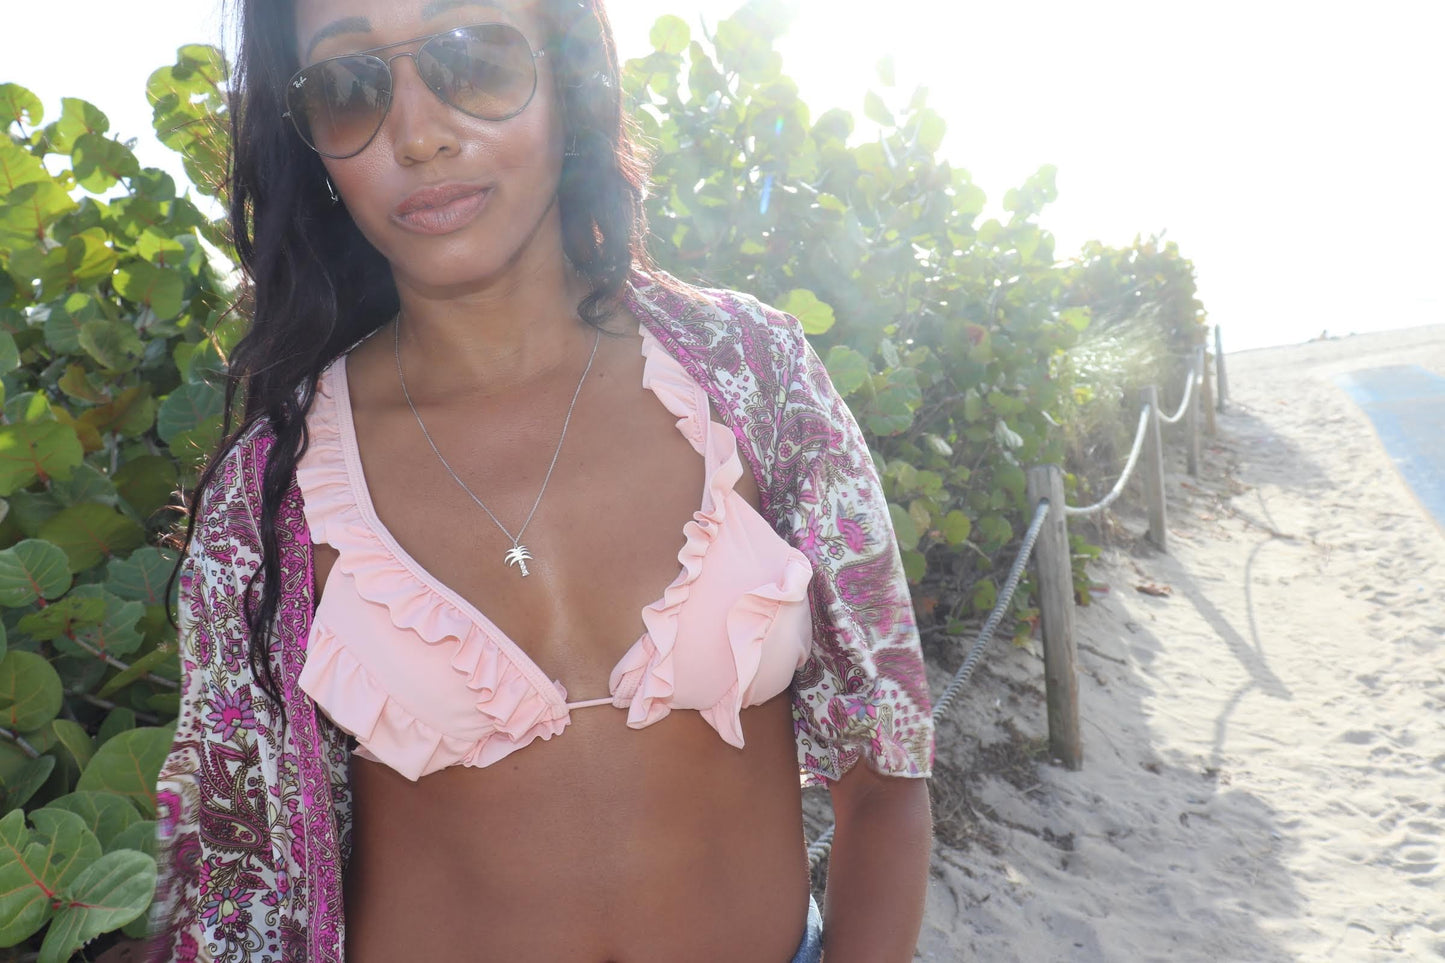 woman on beach in pink bikini and matching paisley jacket in sunglasses wearing the palm tree pendant from the wandering jewel